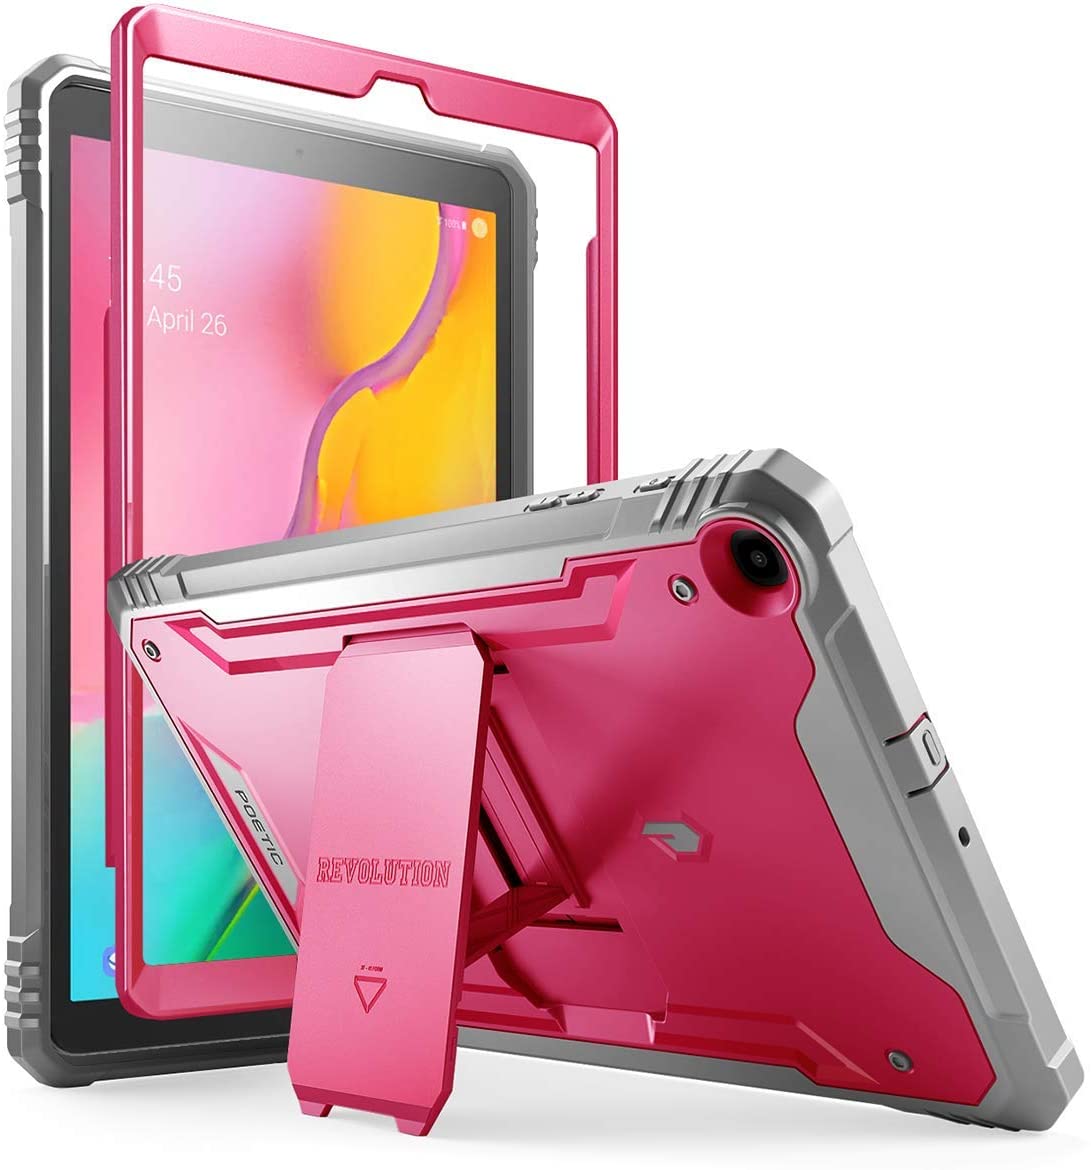 Galaxy Tab A 10.1 2019 Rugged Case with Kickstand, SM-T510/T515, Poetic Full Body Shockproof Cover. - e4cents